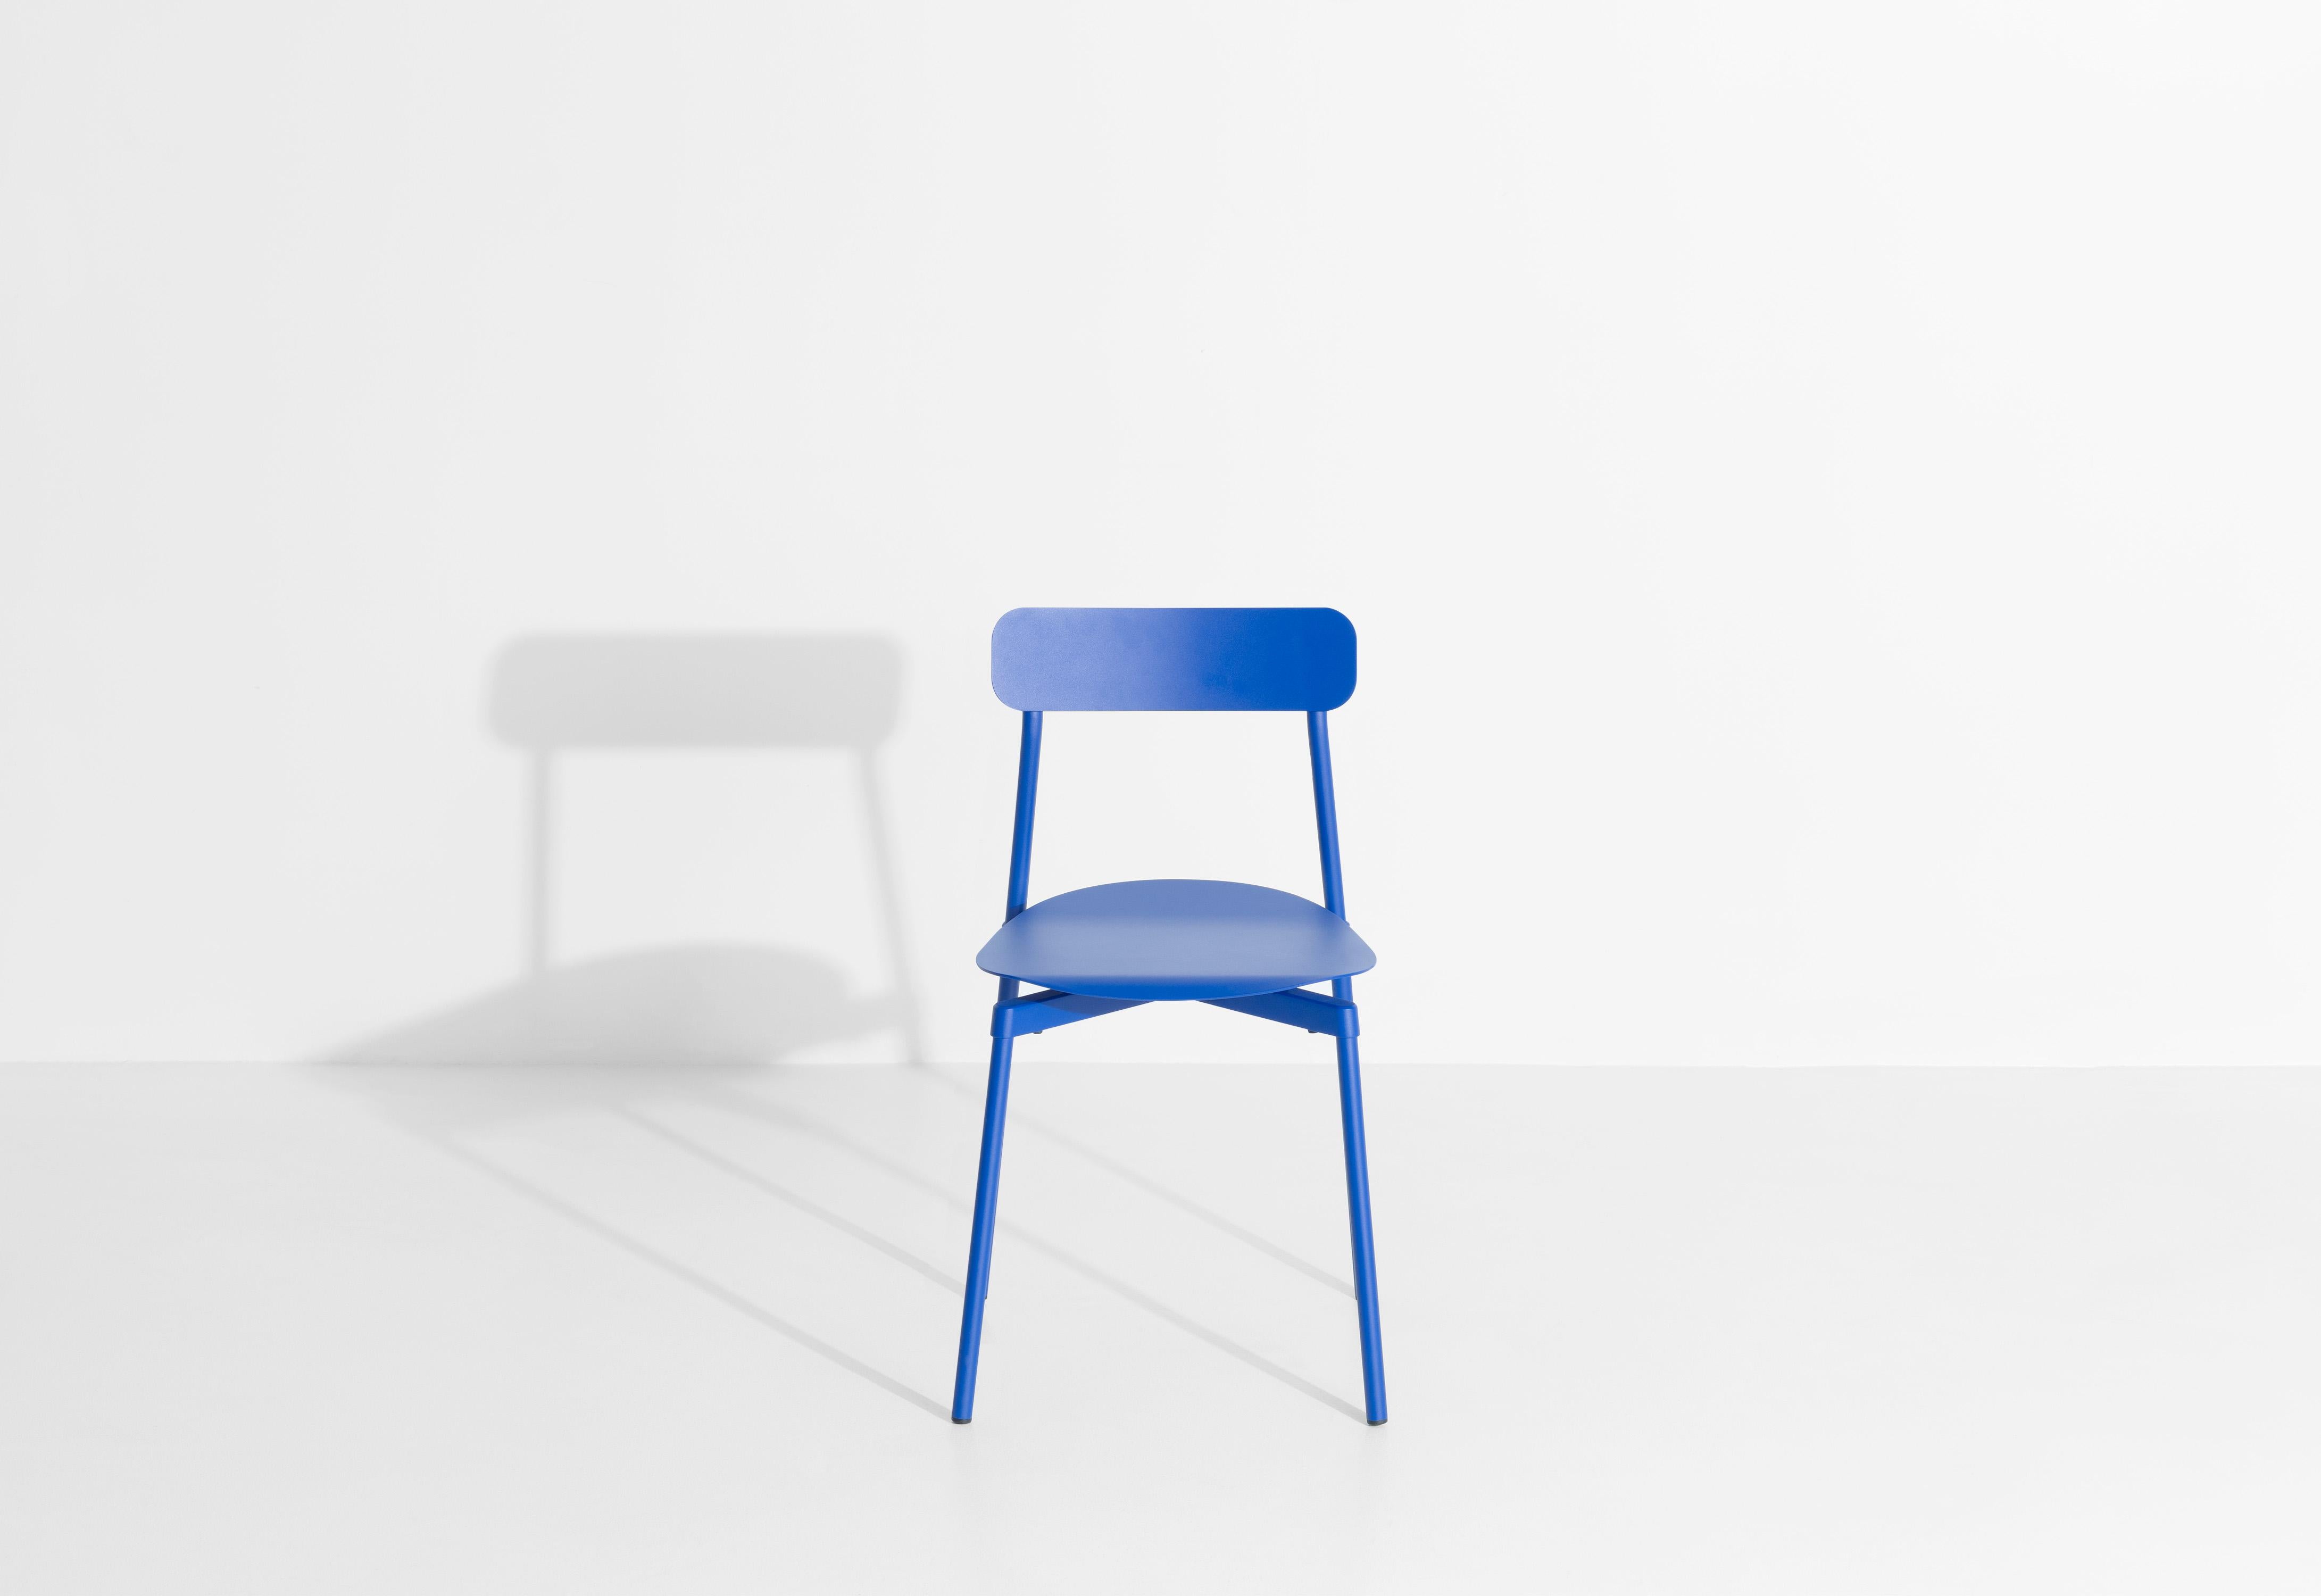 Chinese Petite Friture Fromme Chair in Blue Aluminium by Tom Chung, 2019 For Sale